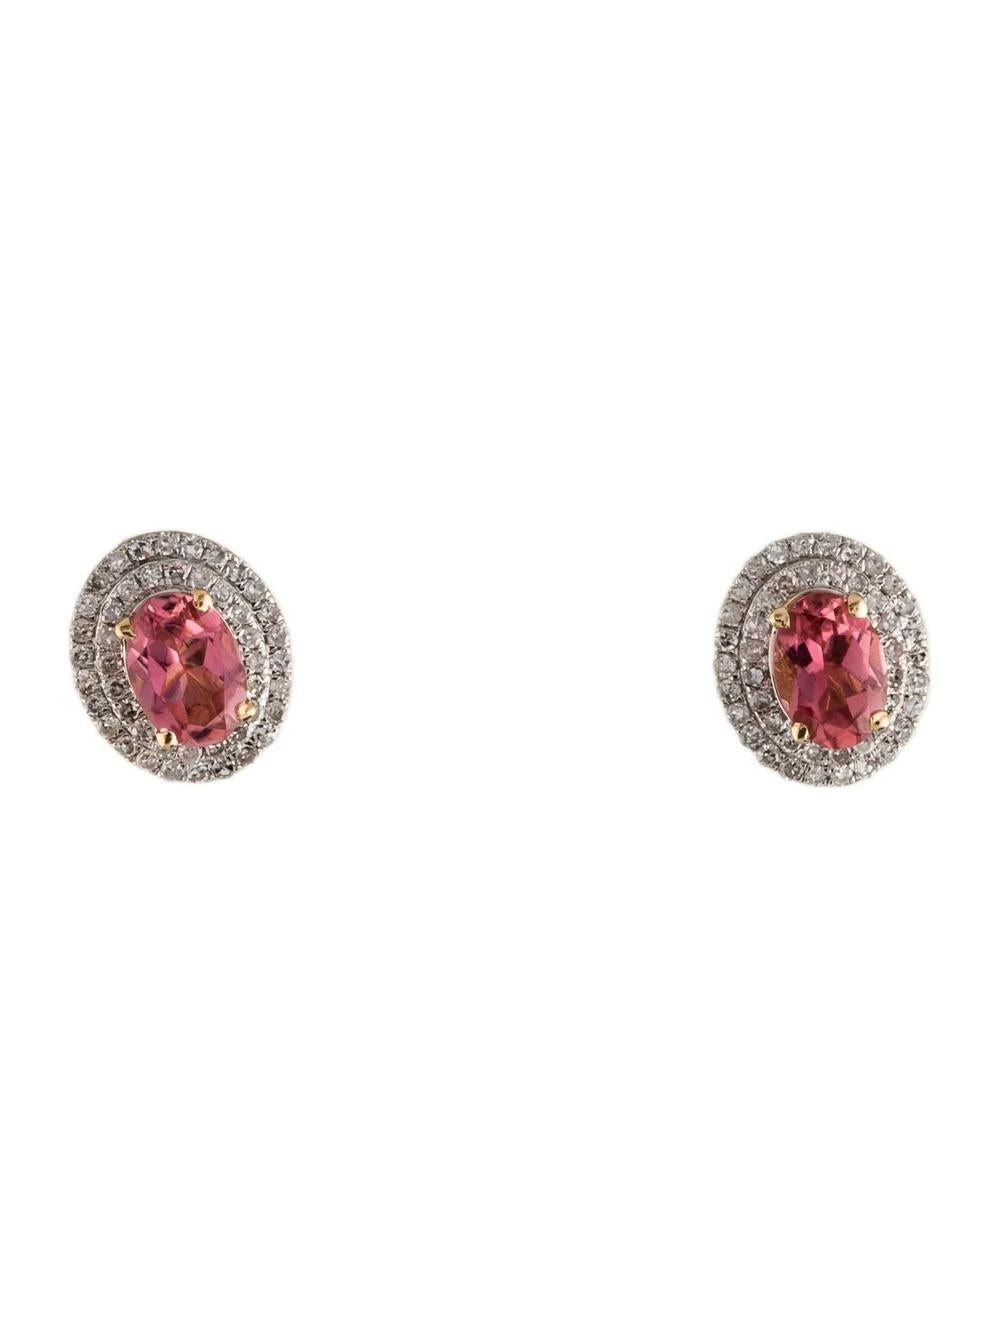 Indulge in the timeless elegance of these exquisite Rhodium-Plated 14K White Gold & 14K Yellow Gold earrings, adorned with a breathtaking 1.35 Carat Oval Modified Brilliant Tourmaline, radiating a captivating pink hue. Accompanied by 92 dazzling